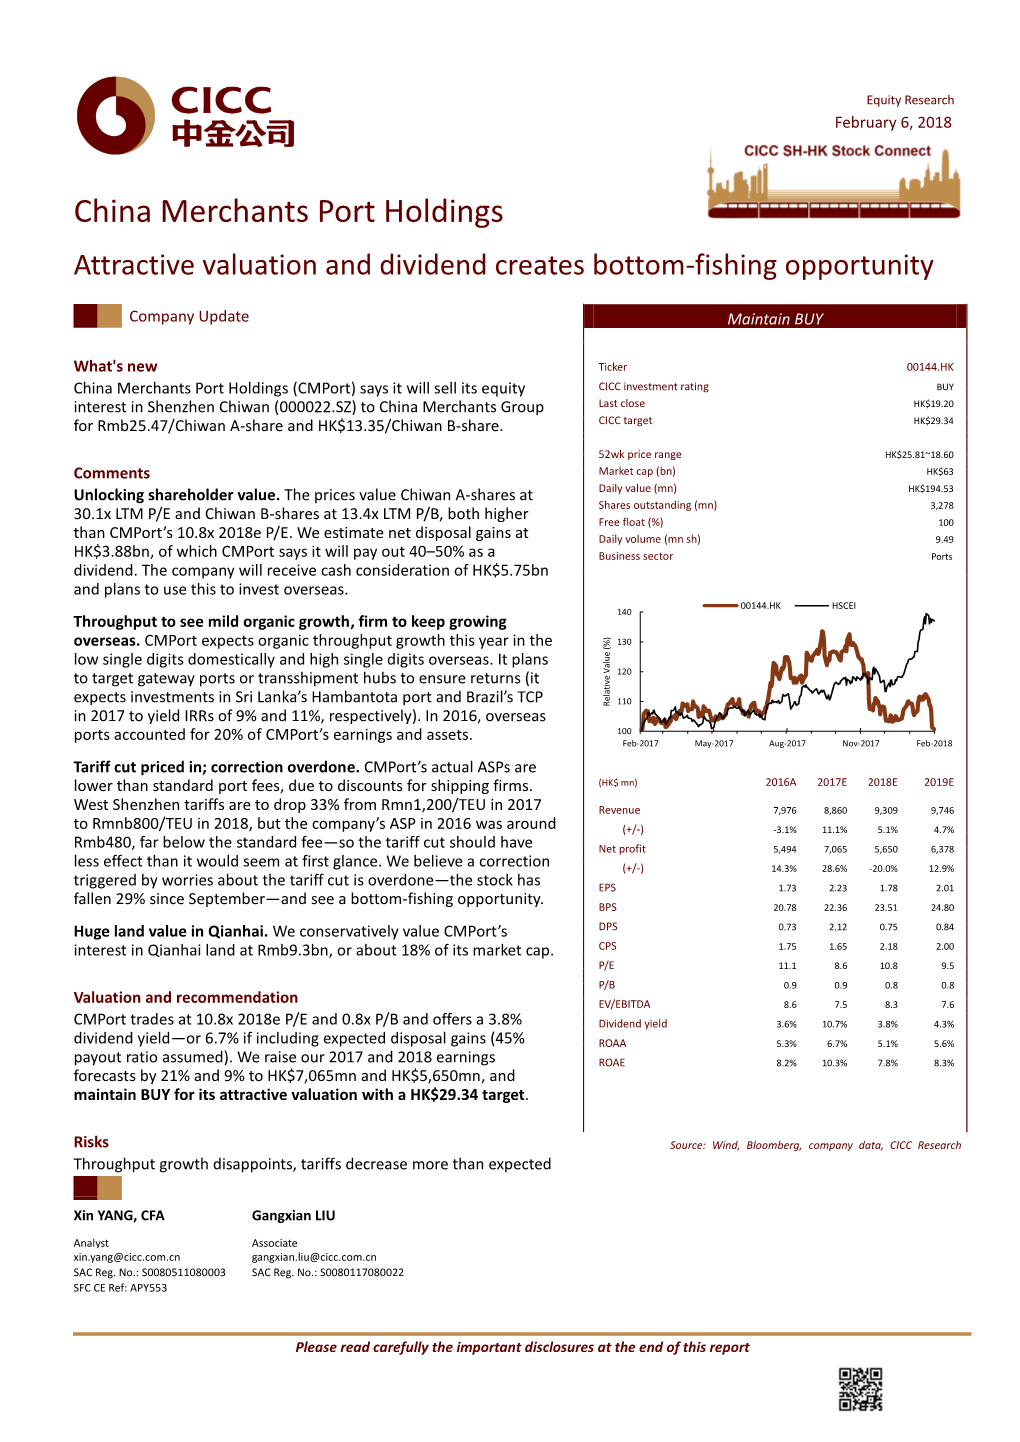 China Merchants Port Holdings Attractive Valuation and Dividend Creates Bottom-Fishing Opportunity